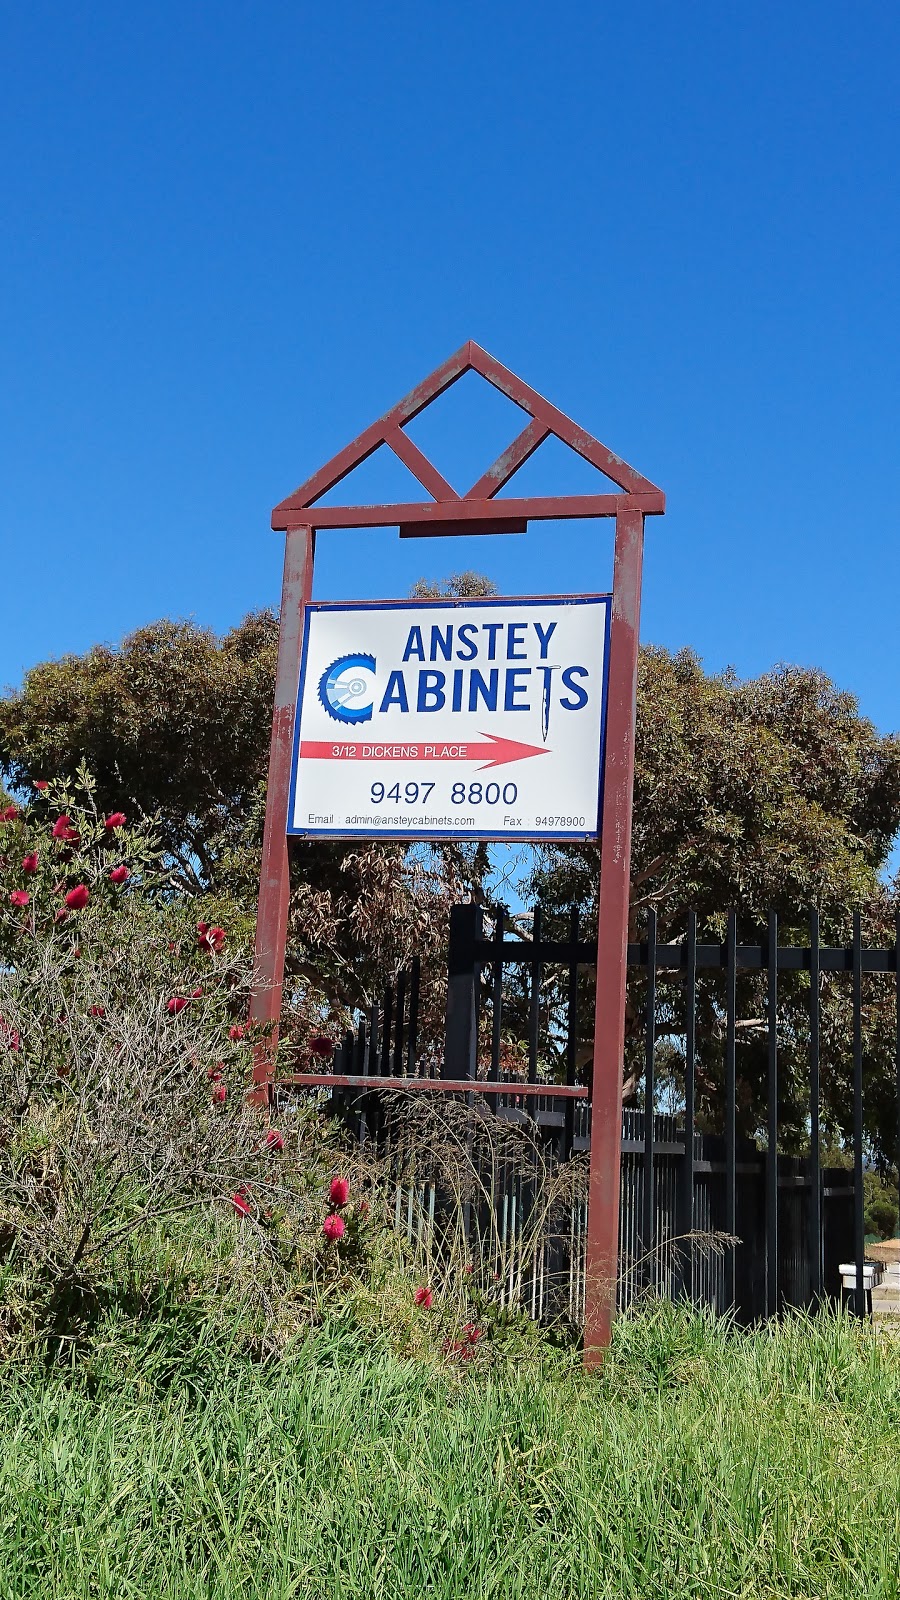 Cabinet Makers Perth by Anstey Cabinets | 3/12 Dickens Pl, Armadale WA 6112, Australia | Phone: (08) 9497 8800